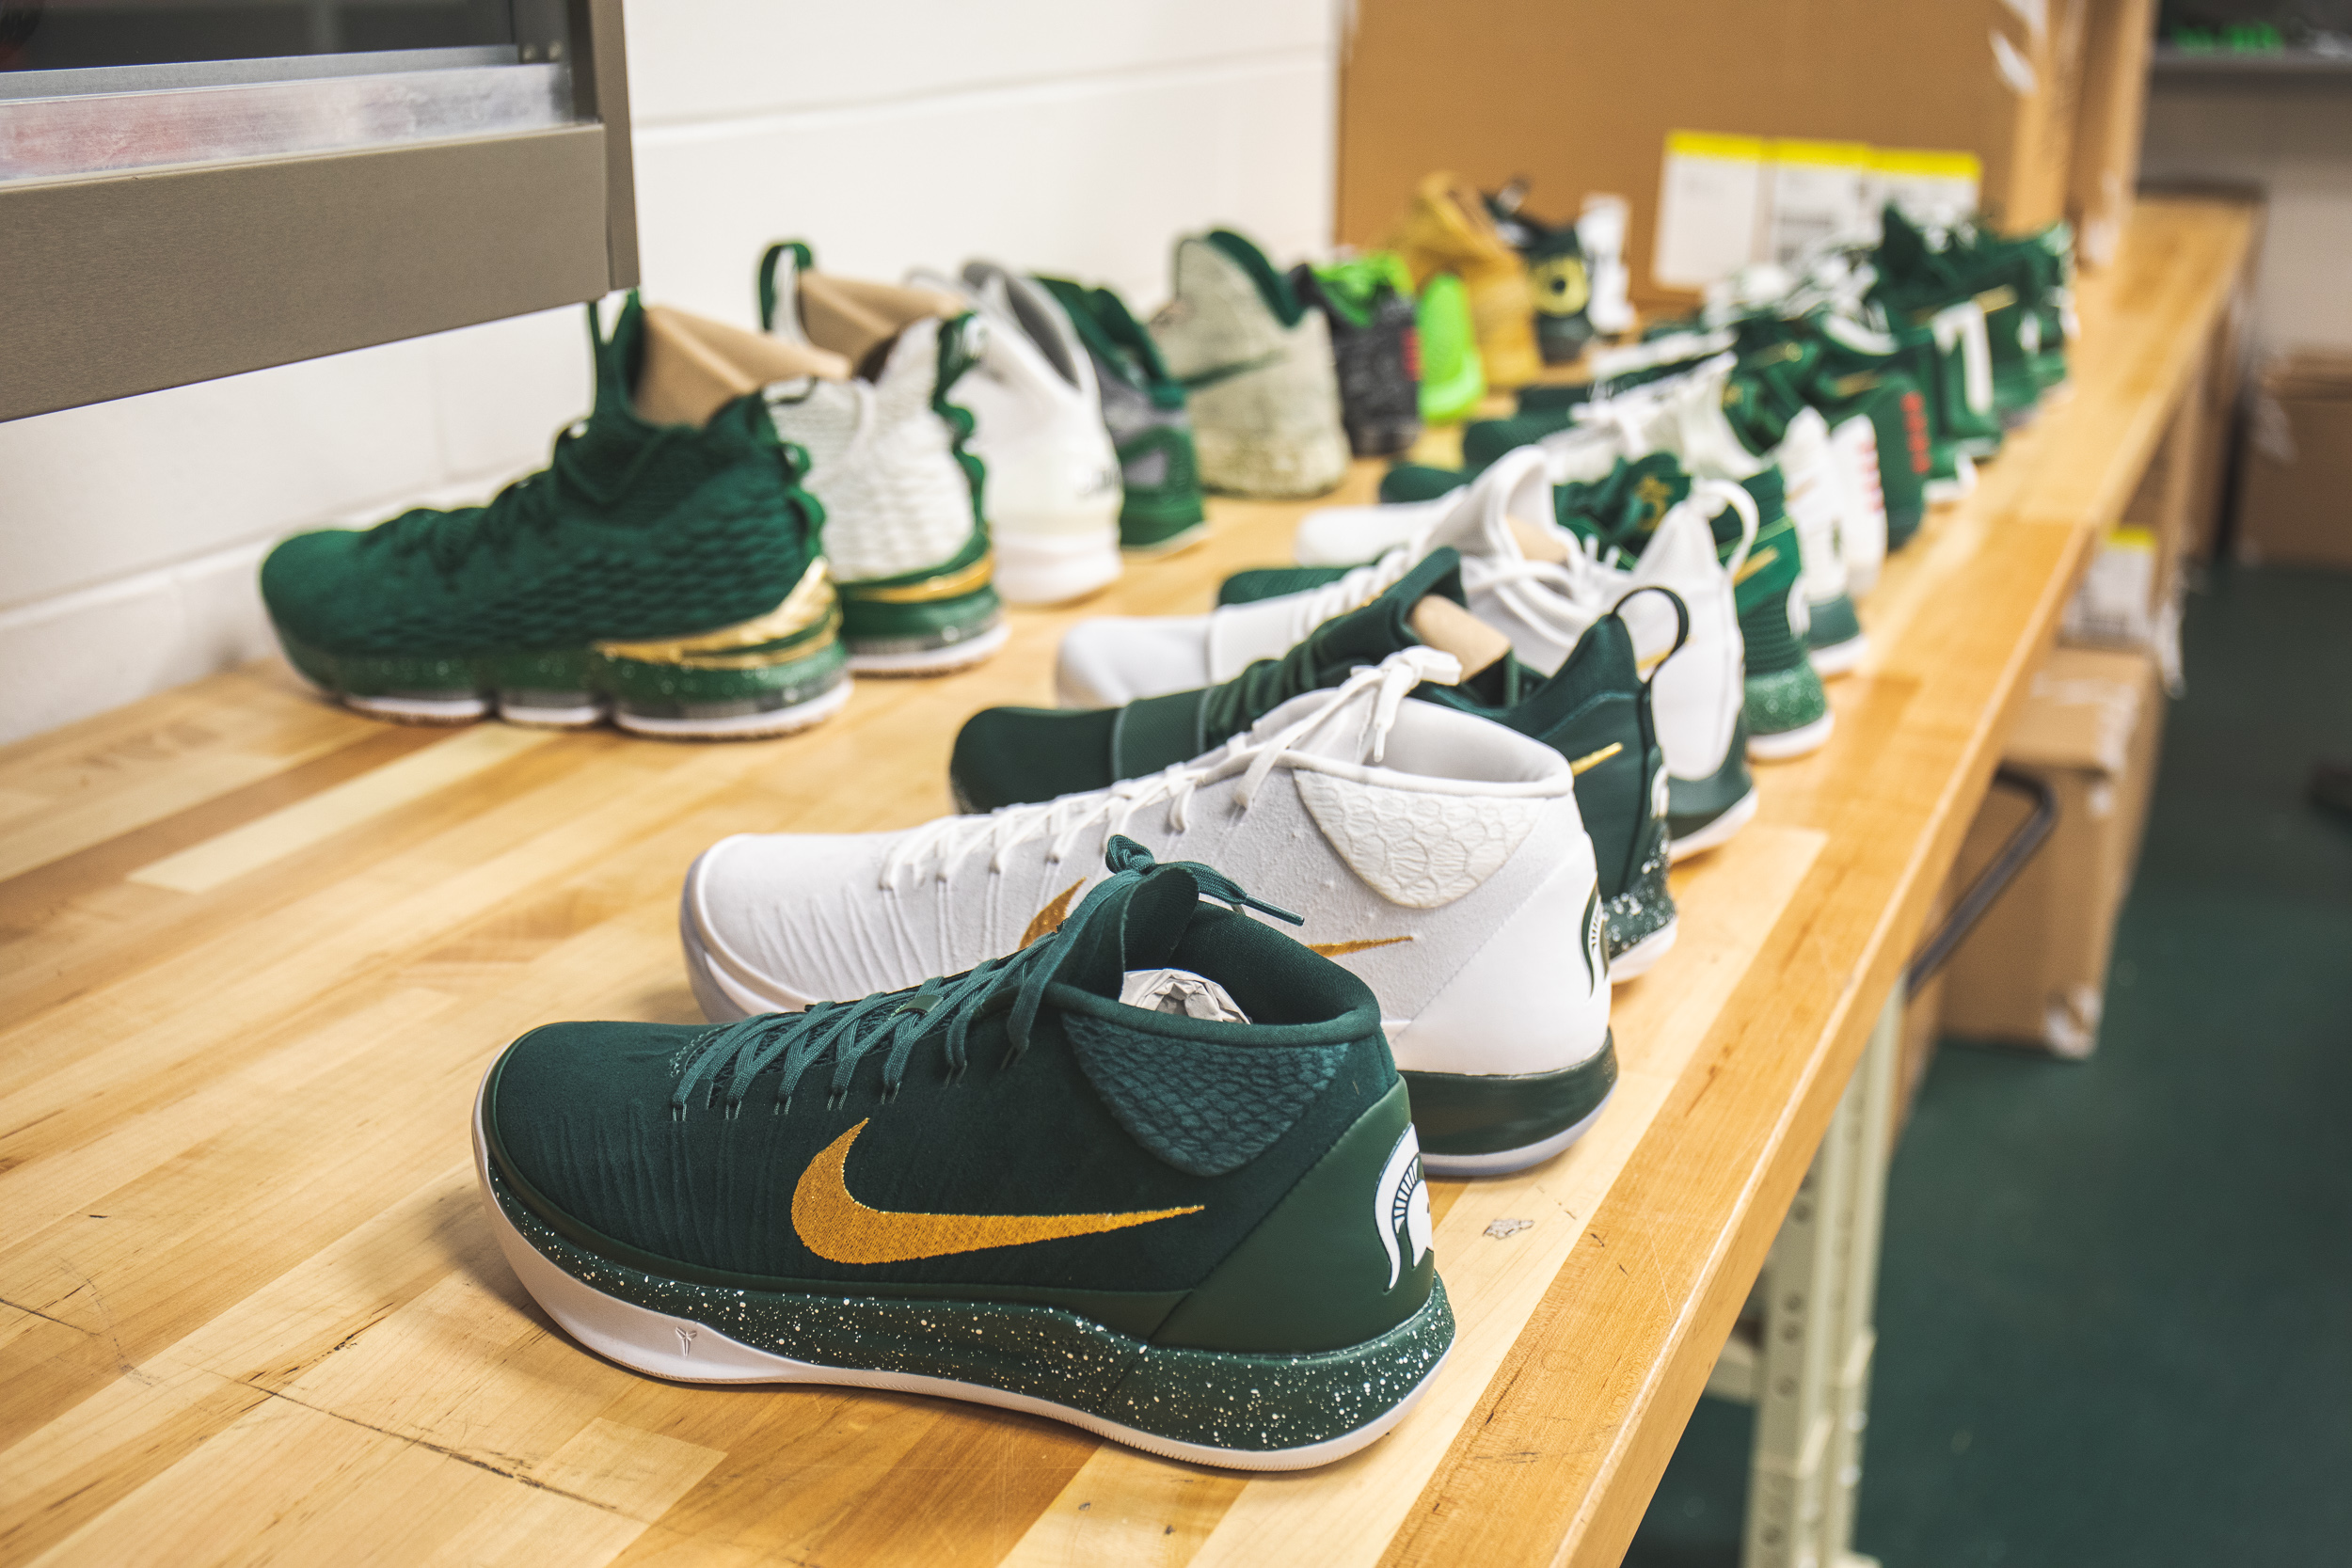 Every Sneaker We Spotted in the Michigan State Basketball Equipment Room